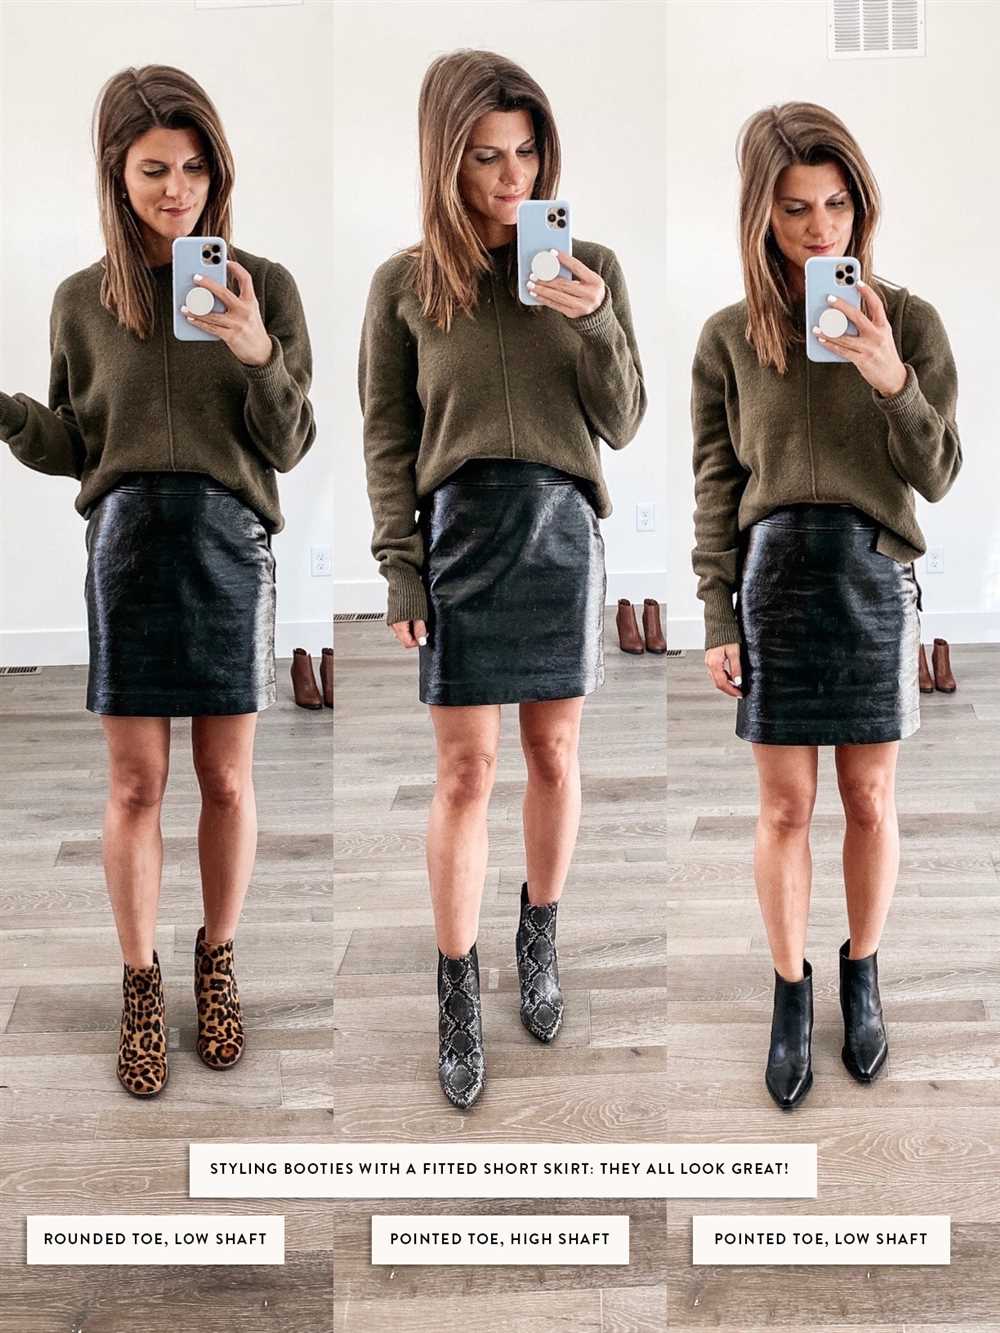 How to wear boots with skirts